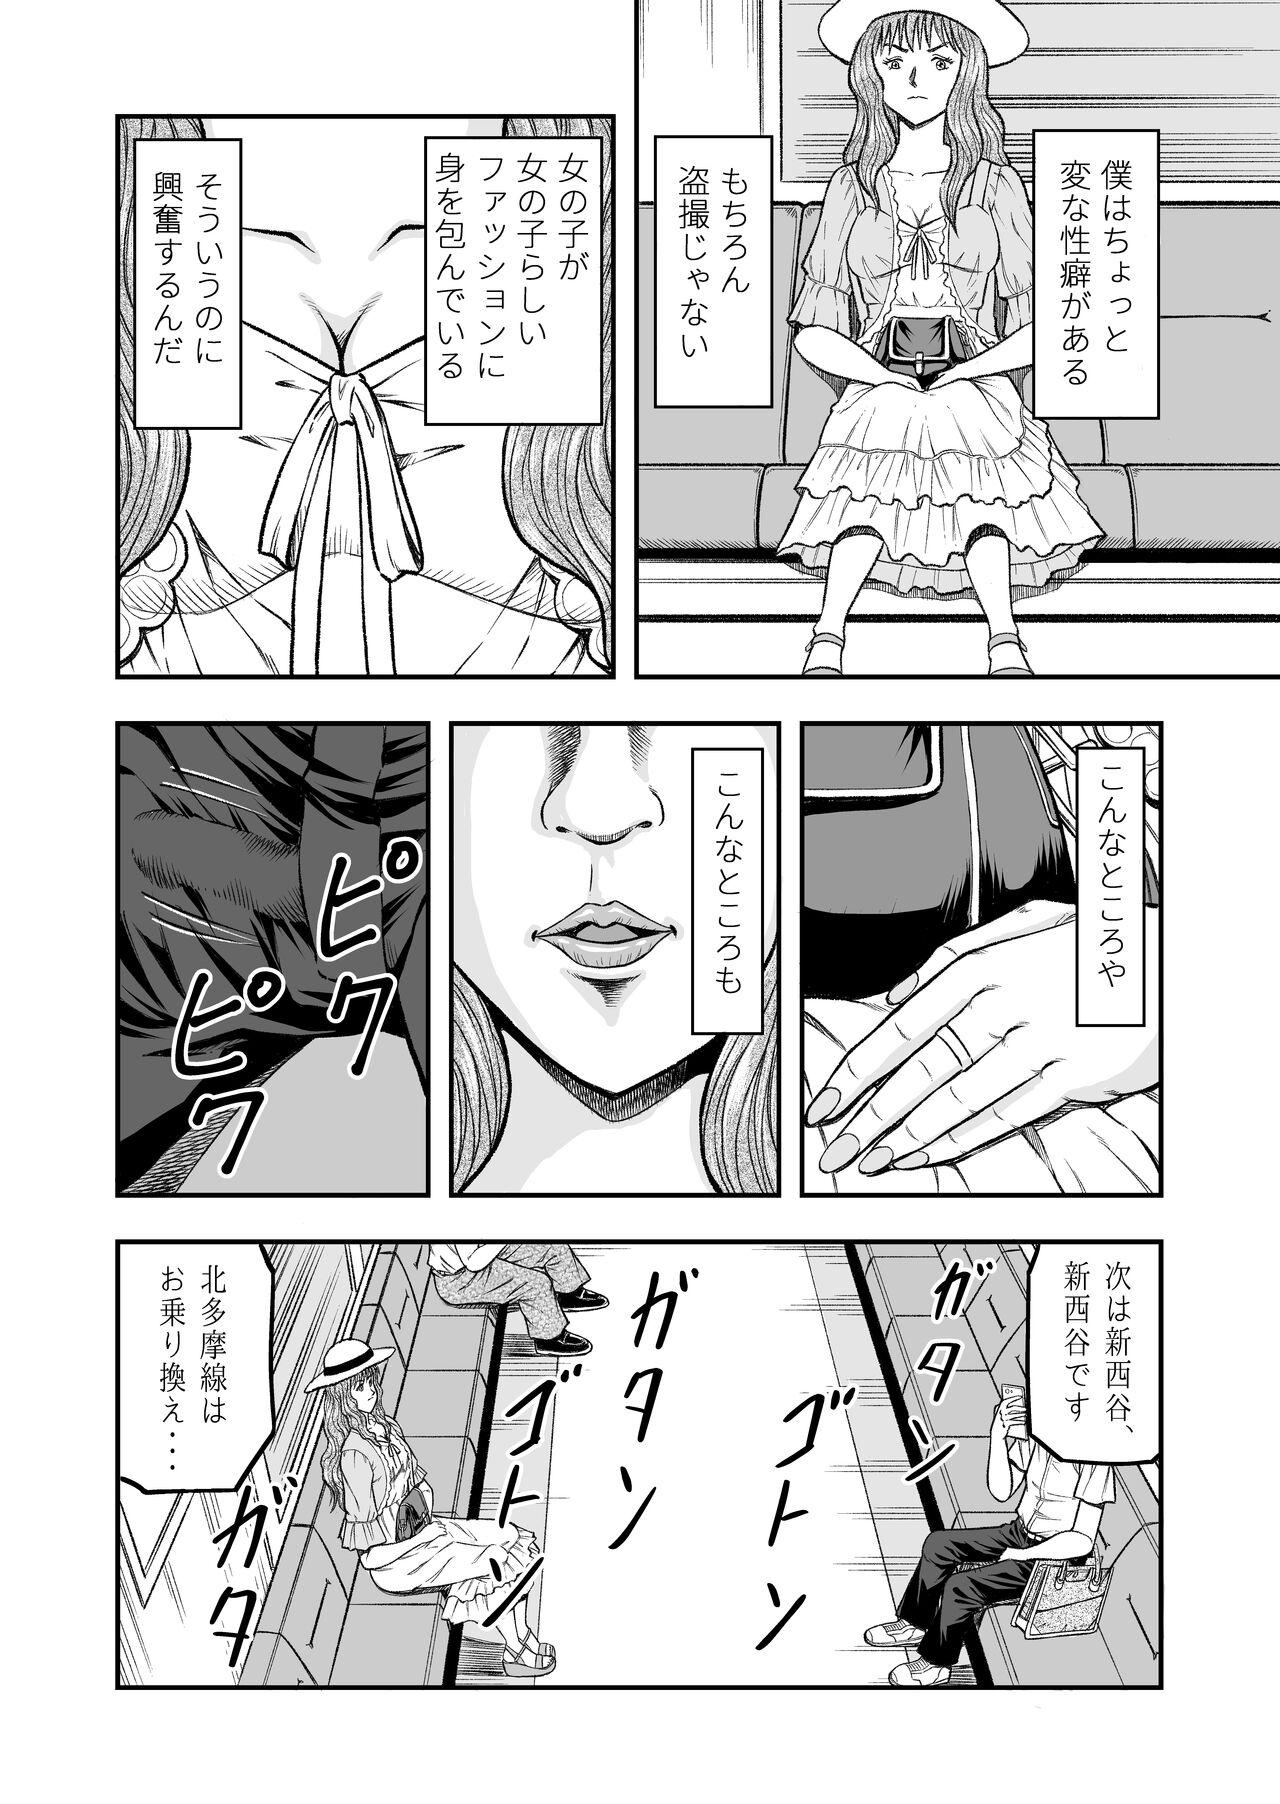 Lingerie OwnWillボクがアタシになったとき 総集編 - Original Stepfamily - Page 4